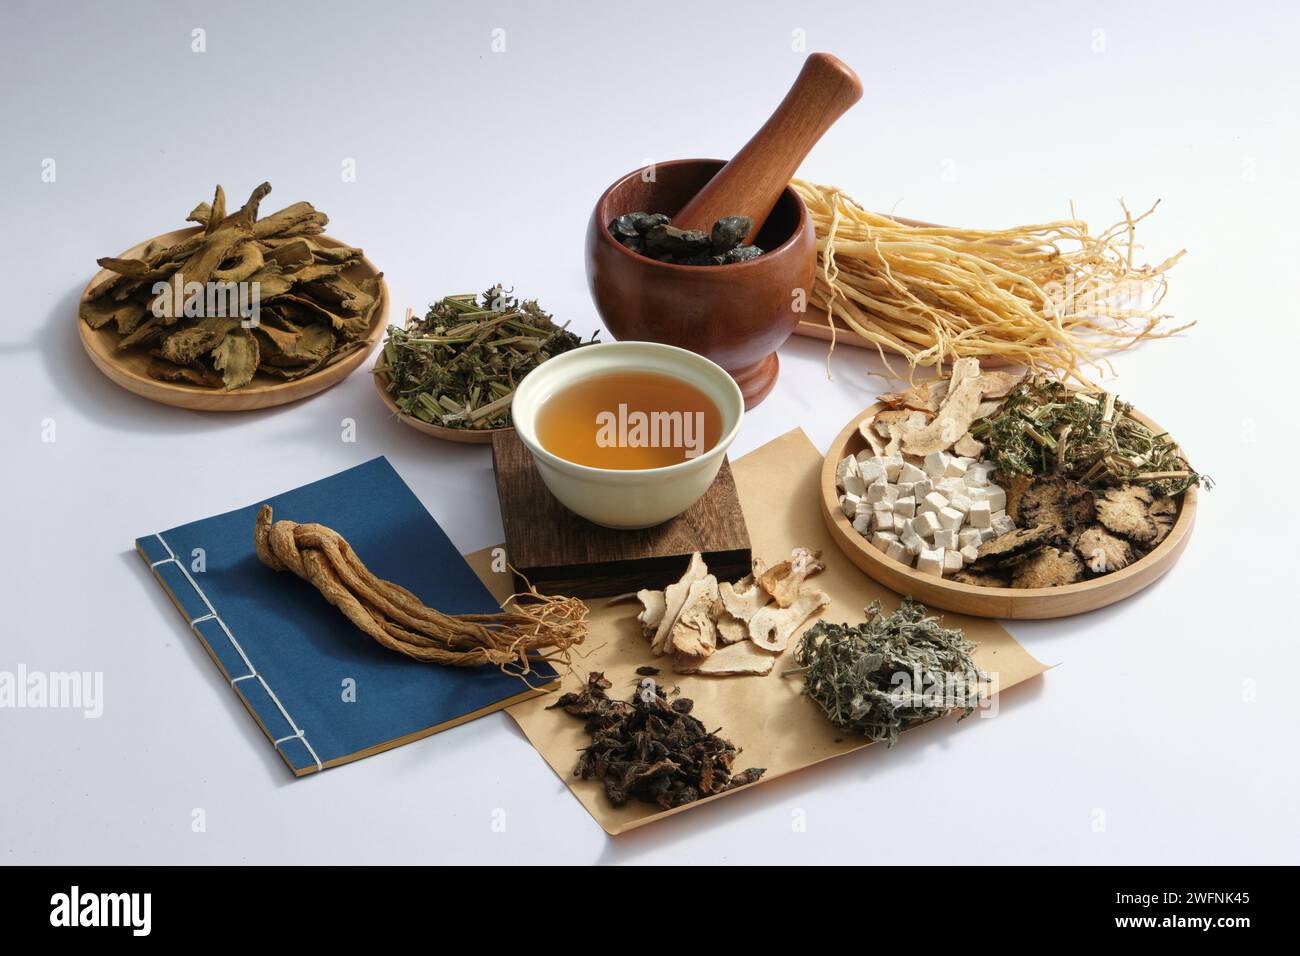 A bowl of medicine placed on a wooden podium in the center with many types of herb displayed around. Chinese medicine treat a wide range of ailments t Stock Photo